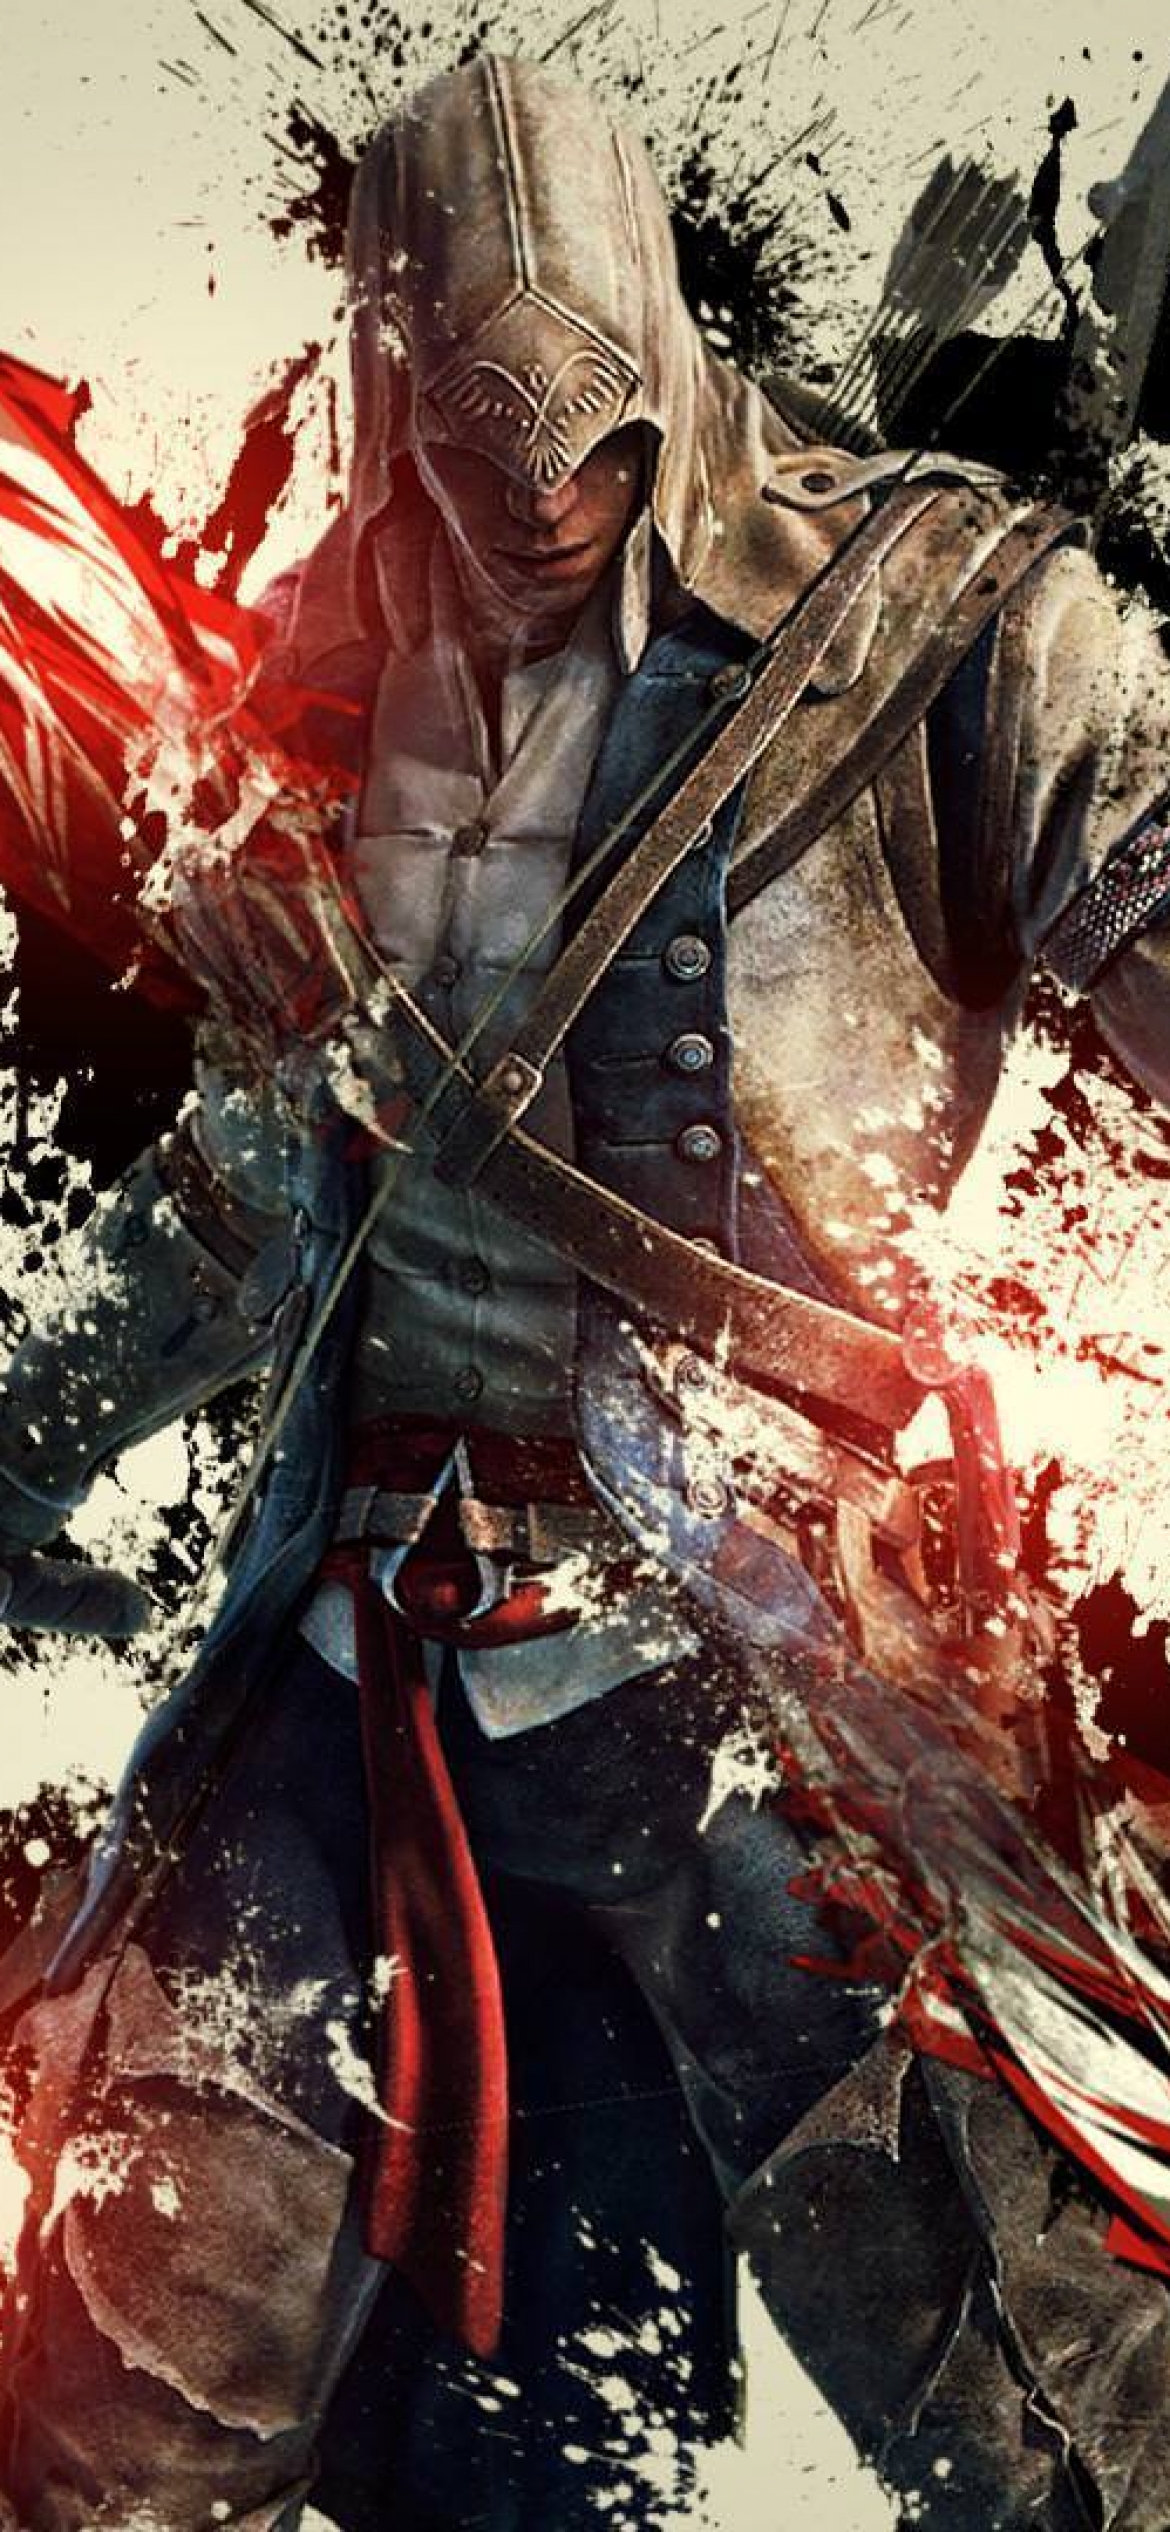 Download Assassin's Creed 2560x1440 Free In 5K 8K Ultra High Quality  Wallpaper 